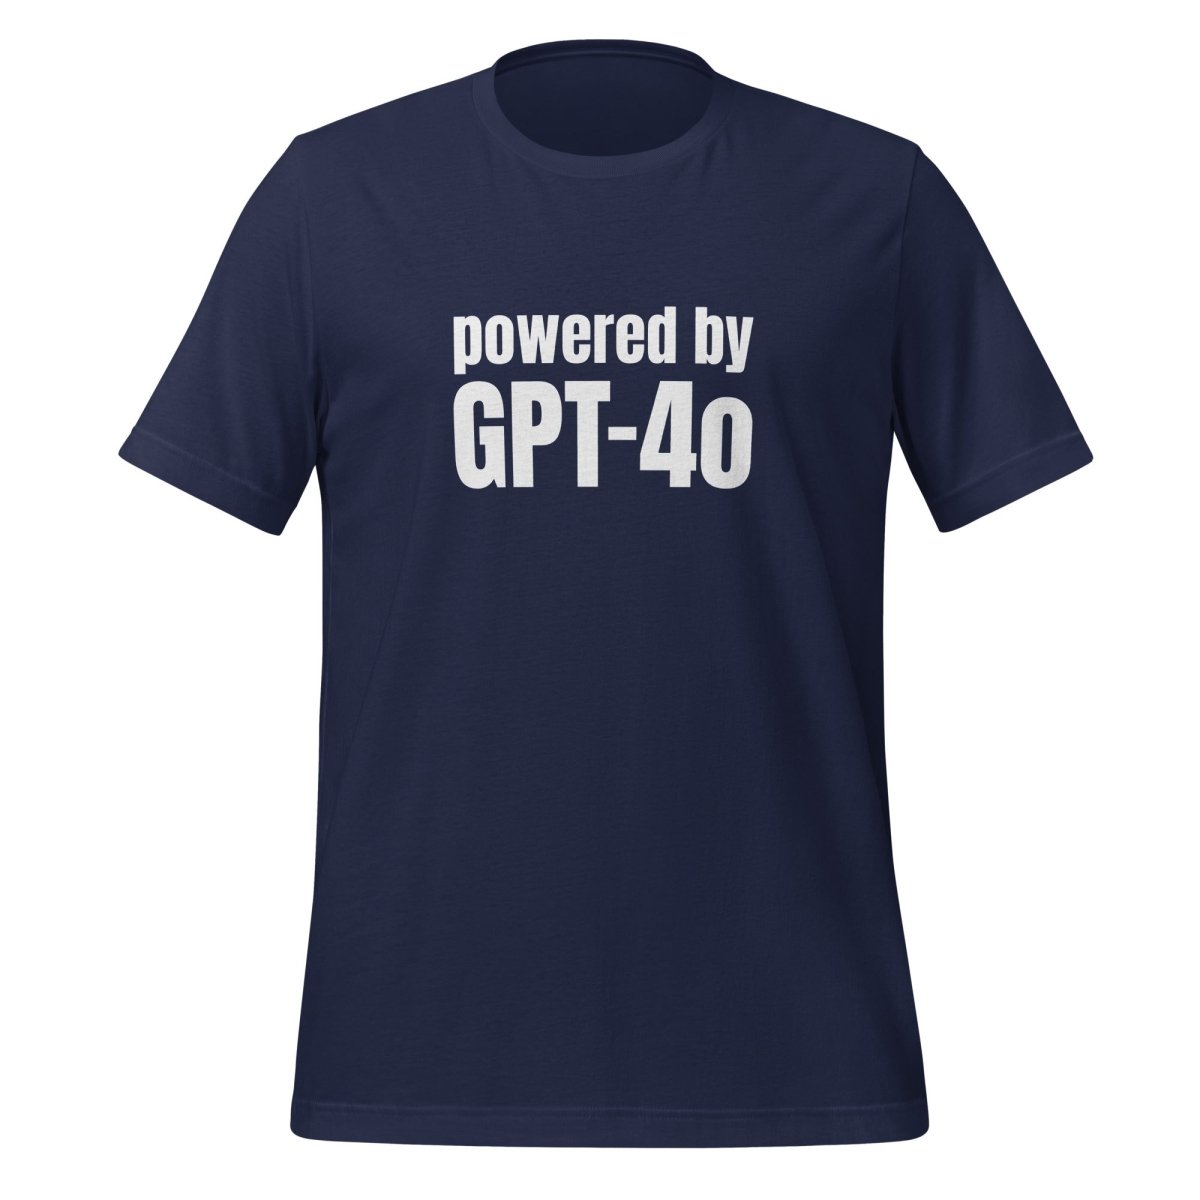 Powered by GPT - 4o T - Shirt (unisex) - Navy - AI Store